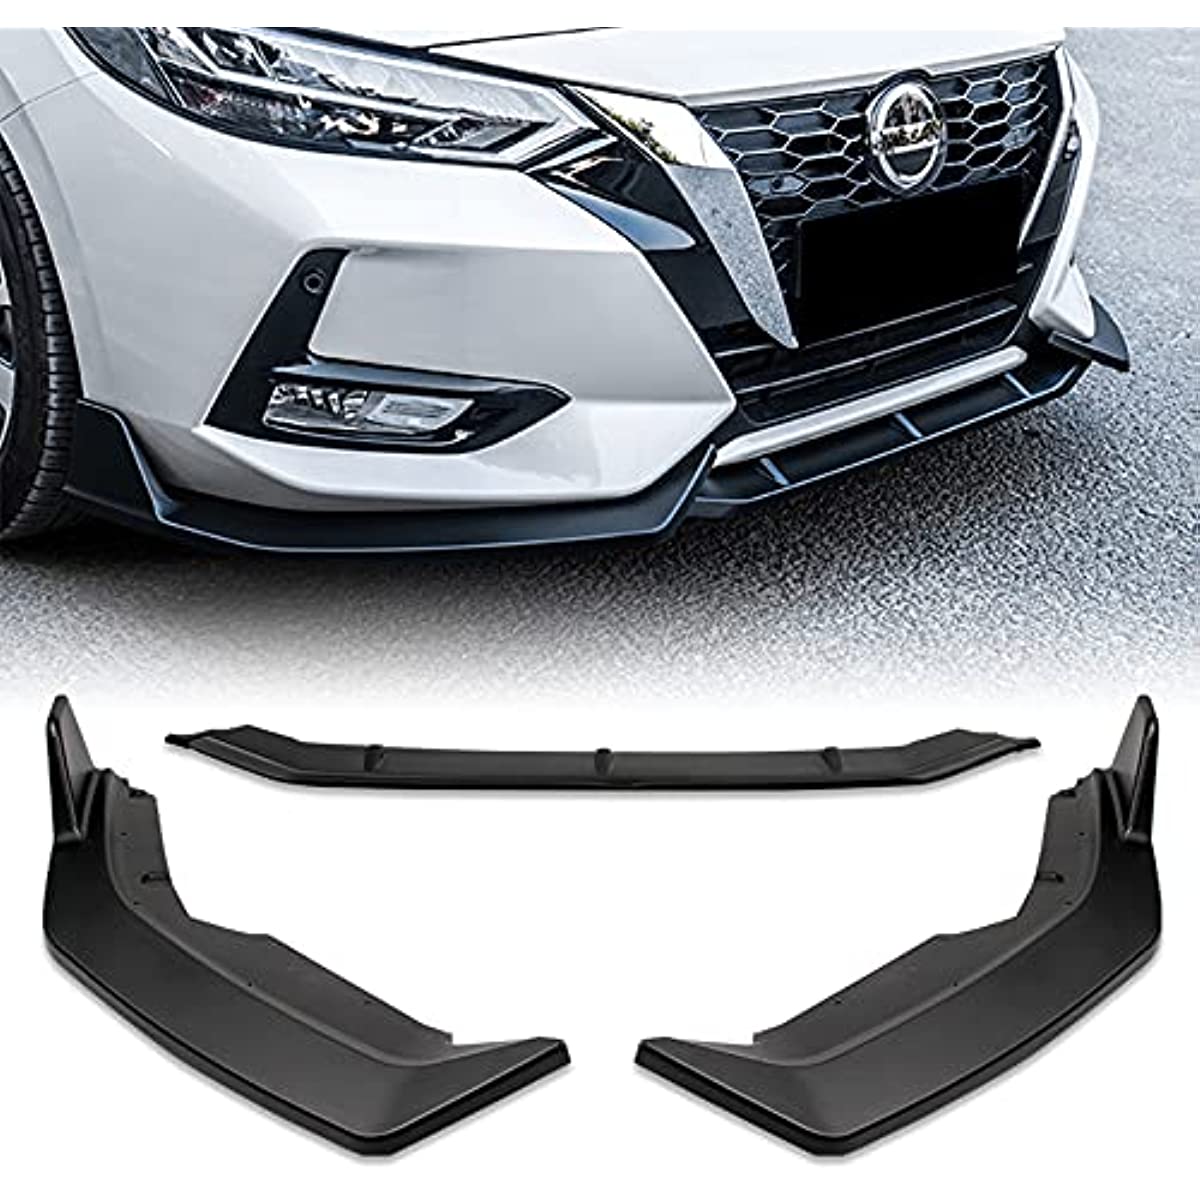 Front Lip Kit & Side Skirt Extensions Diffuser Set compatible with 2020-2021 Nissan Sentra Sedan/4DR Only